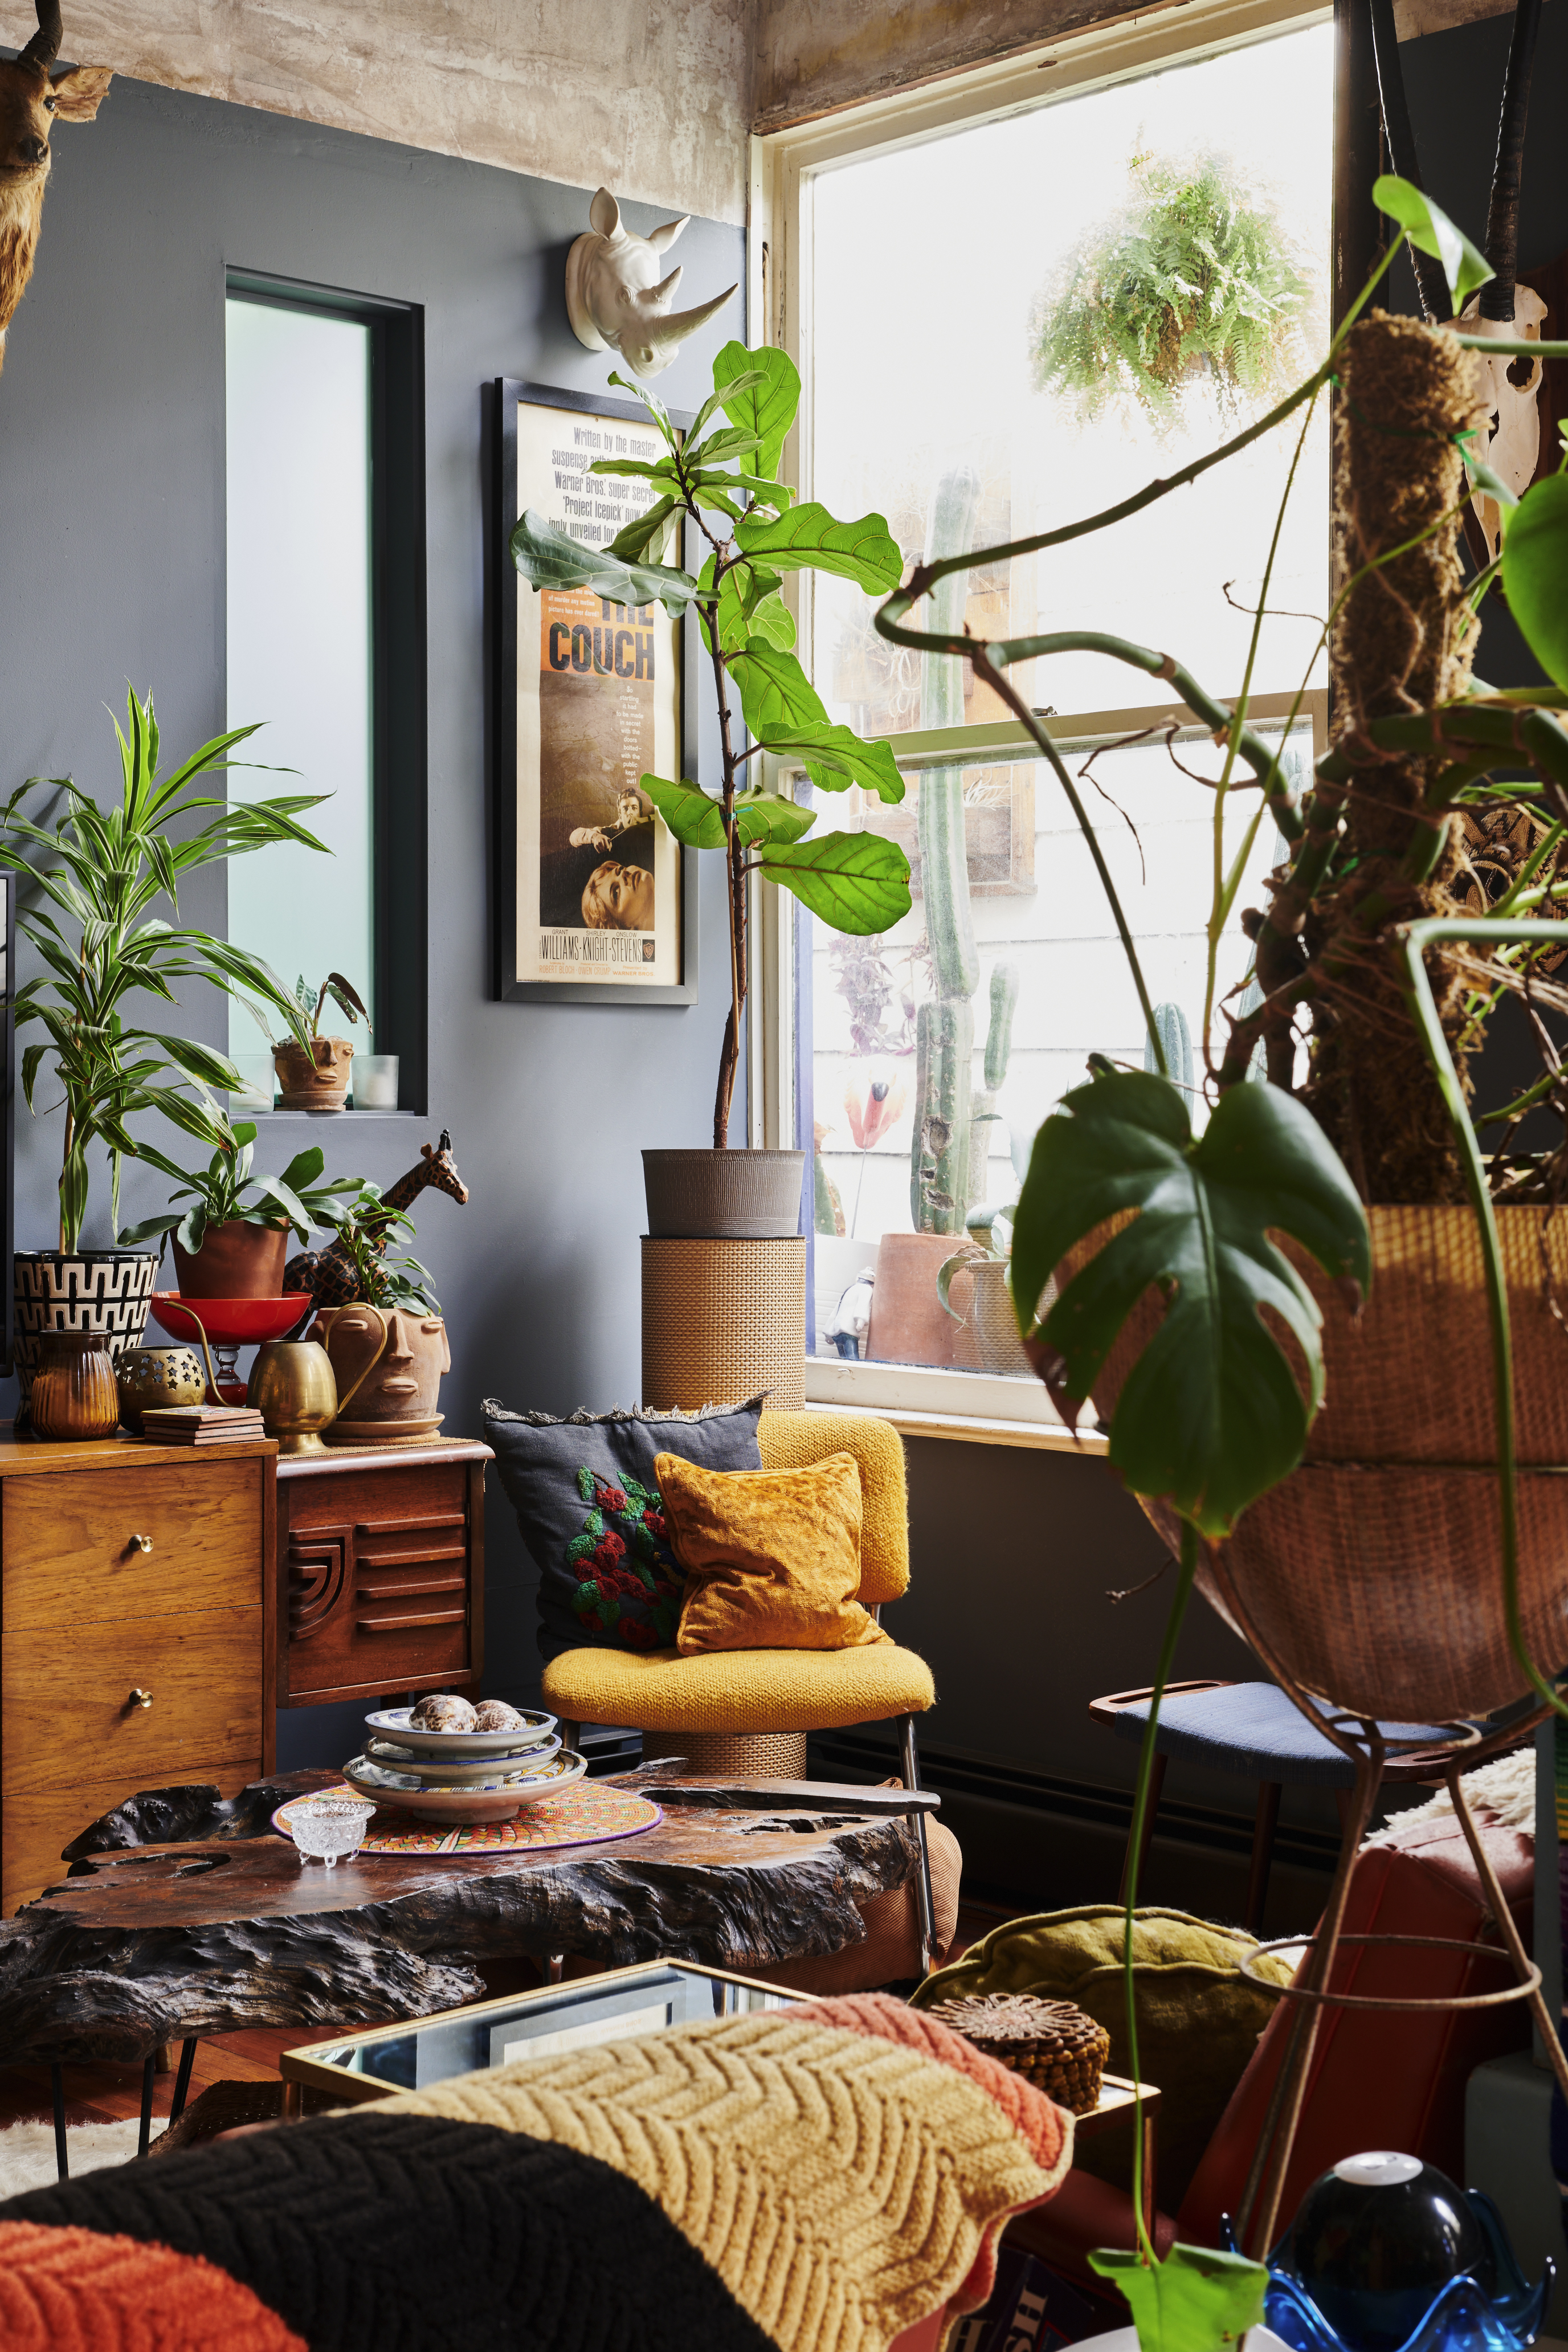 A cozy living room features eclectic decor with numerous potted plants, a wooden coffee table, colorful cushions on a yellow chair, and a wall-mounted rhino head.